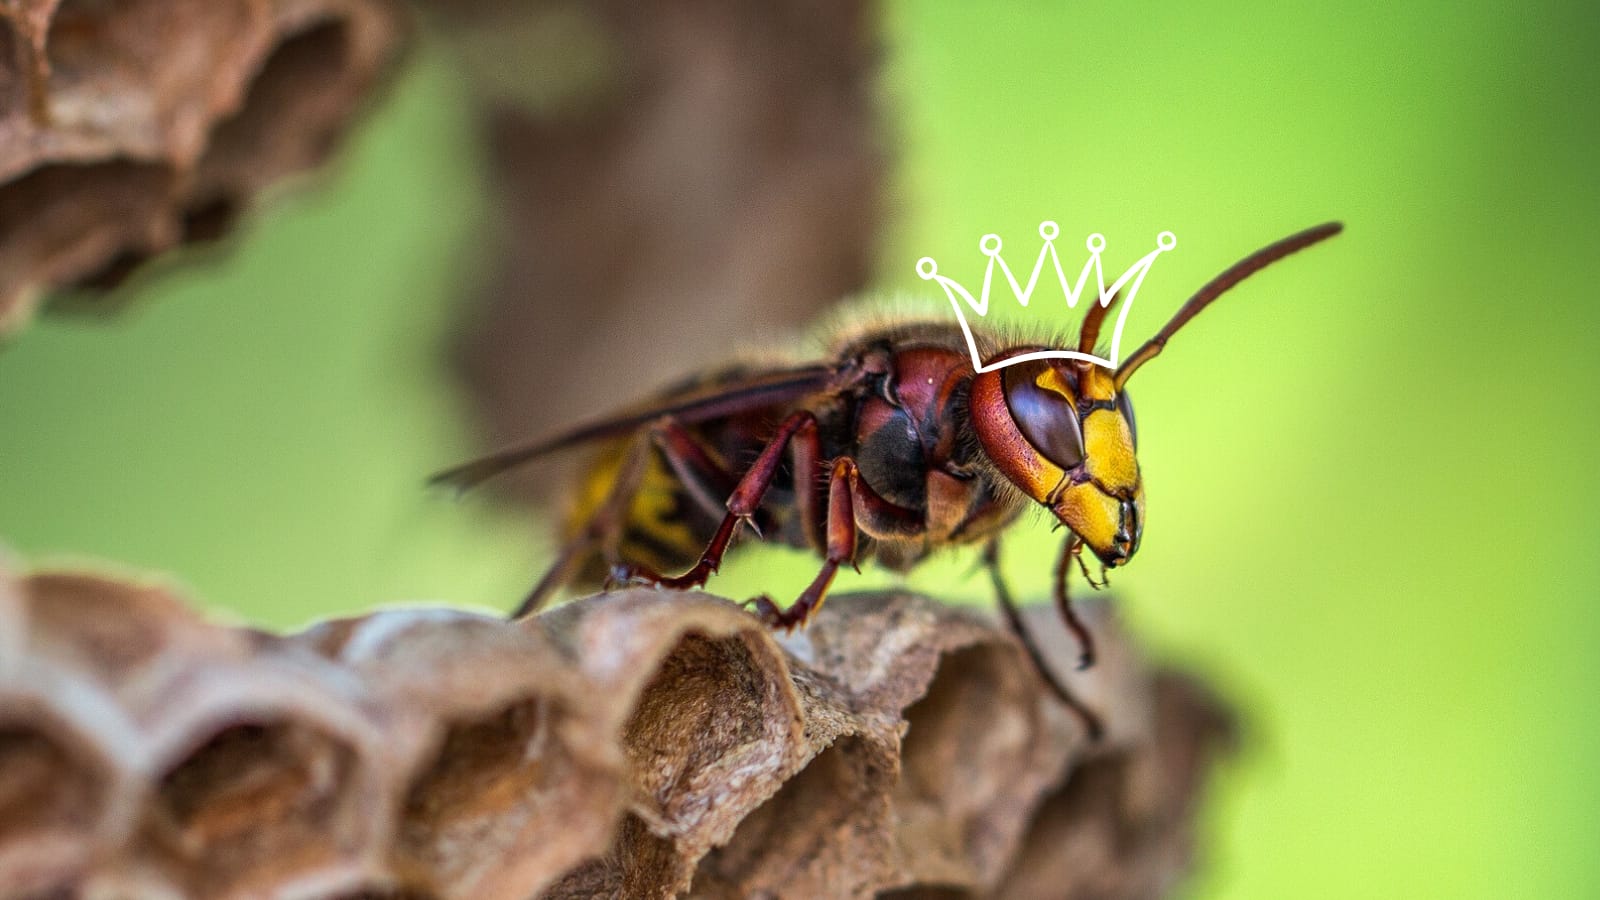 Image: hornet wearing a crown